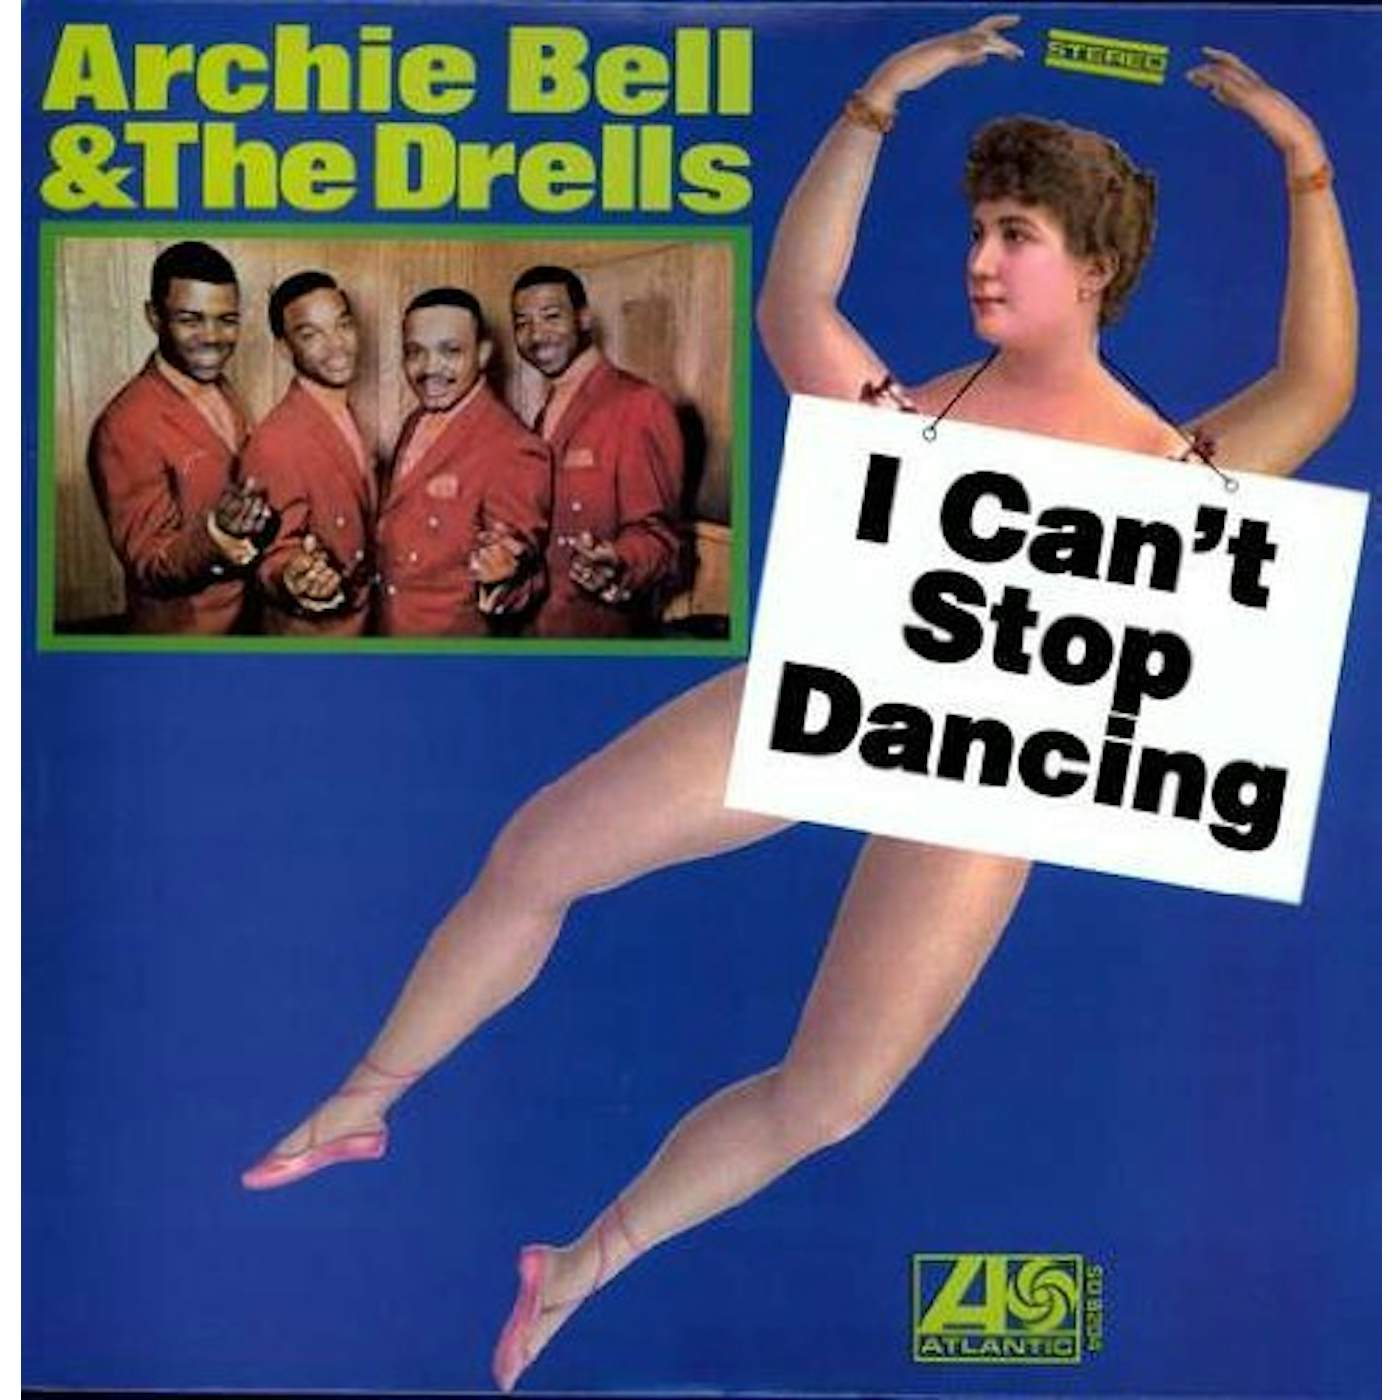 Archie Bell & The Drells I Can't Stop Dancing Vinyl Record